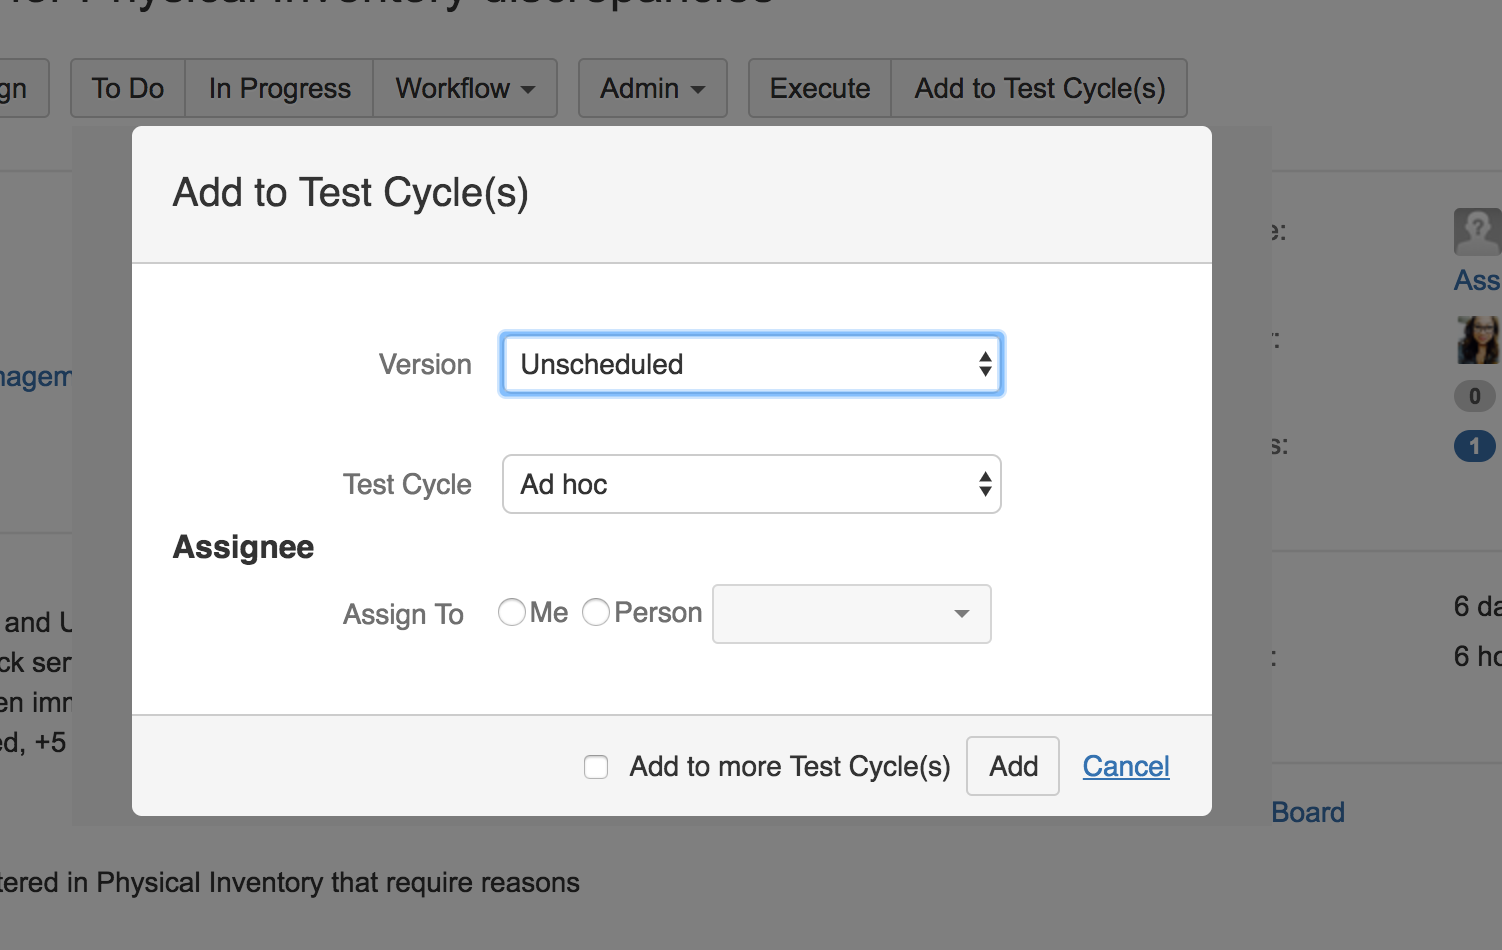 Adding Test Cycle